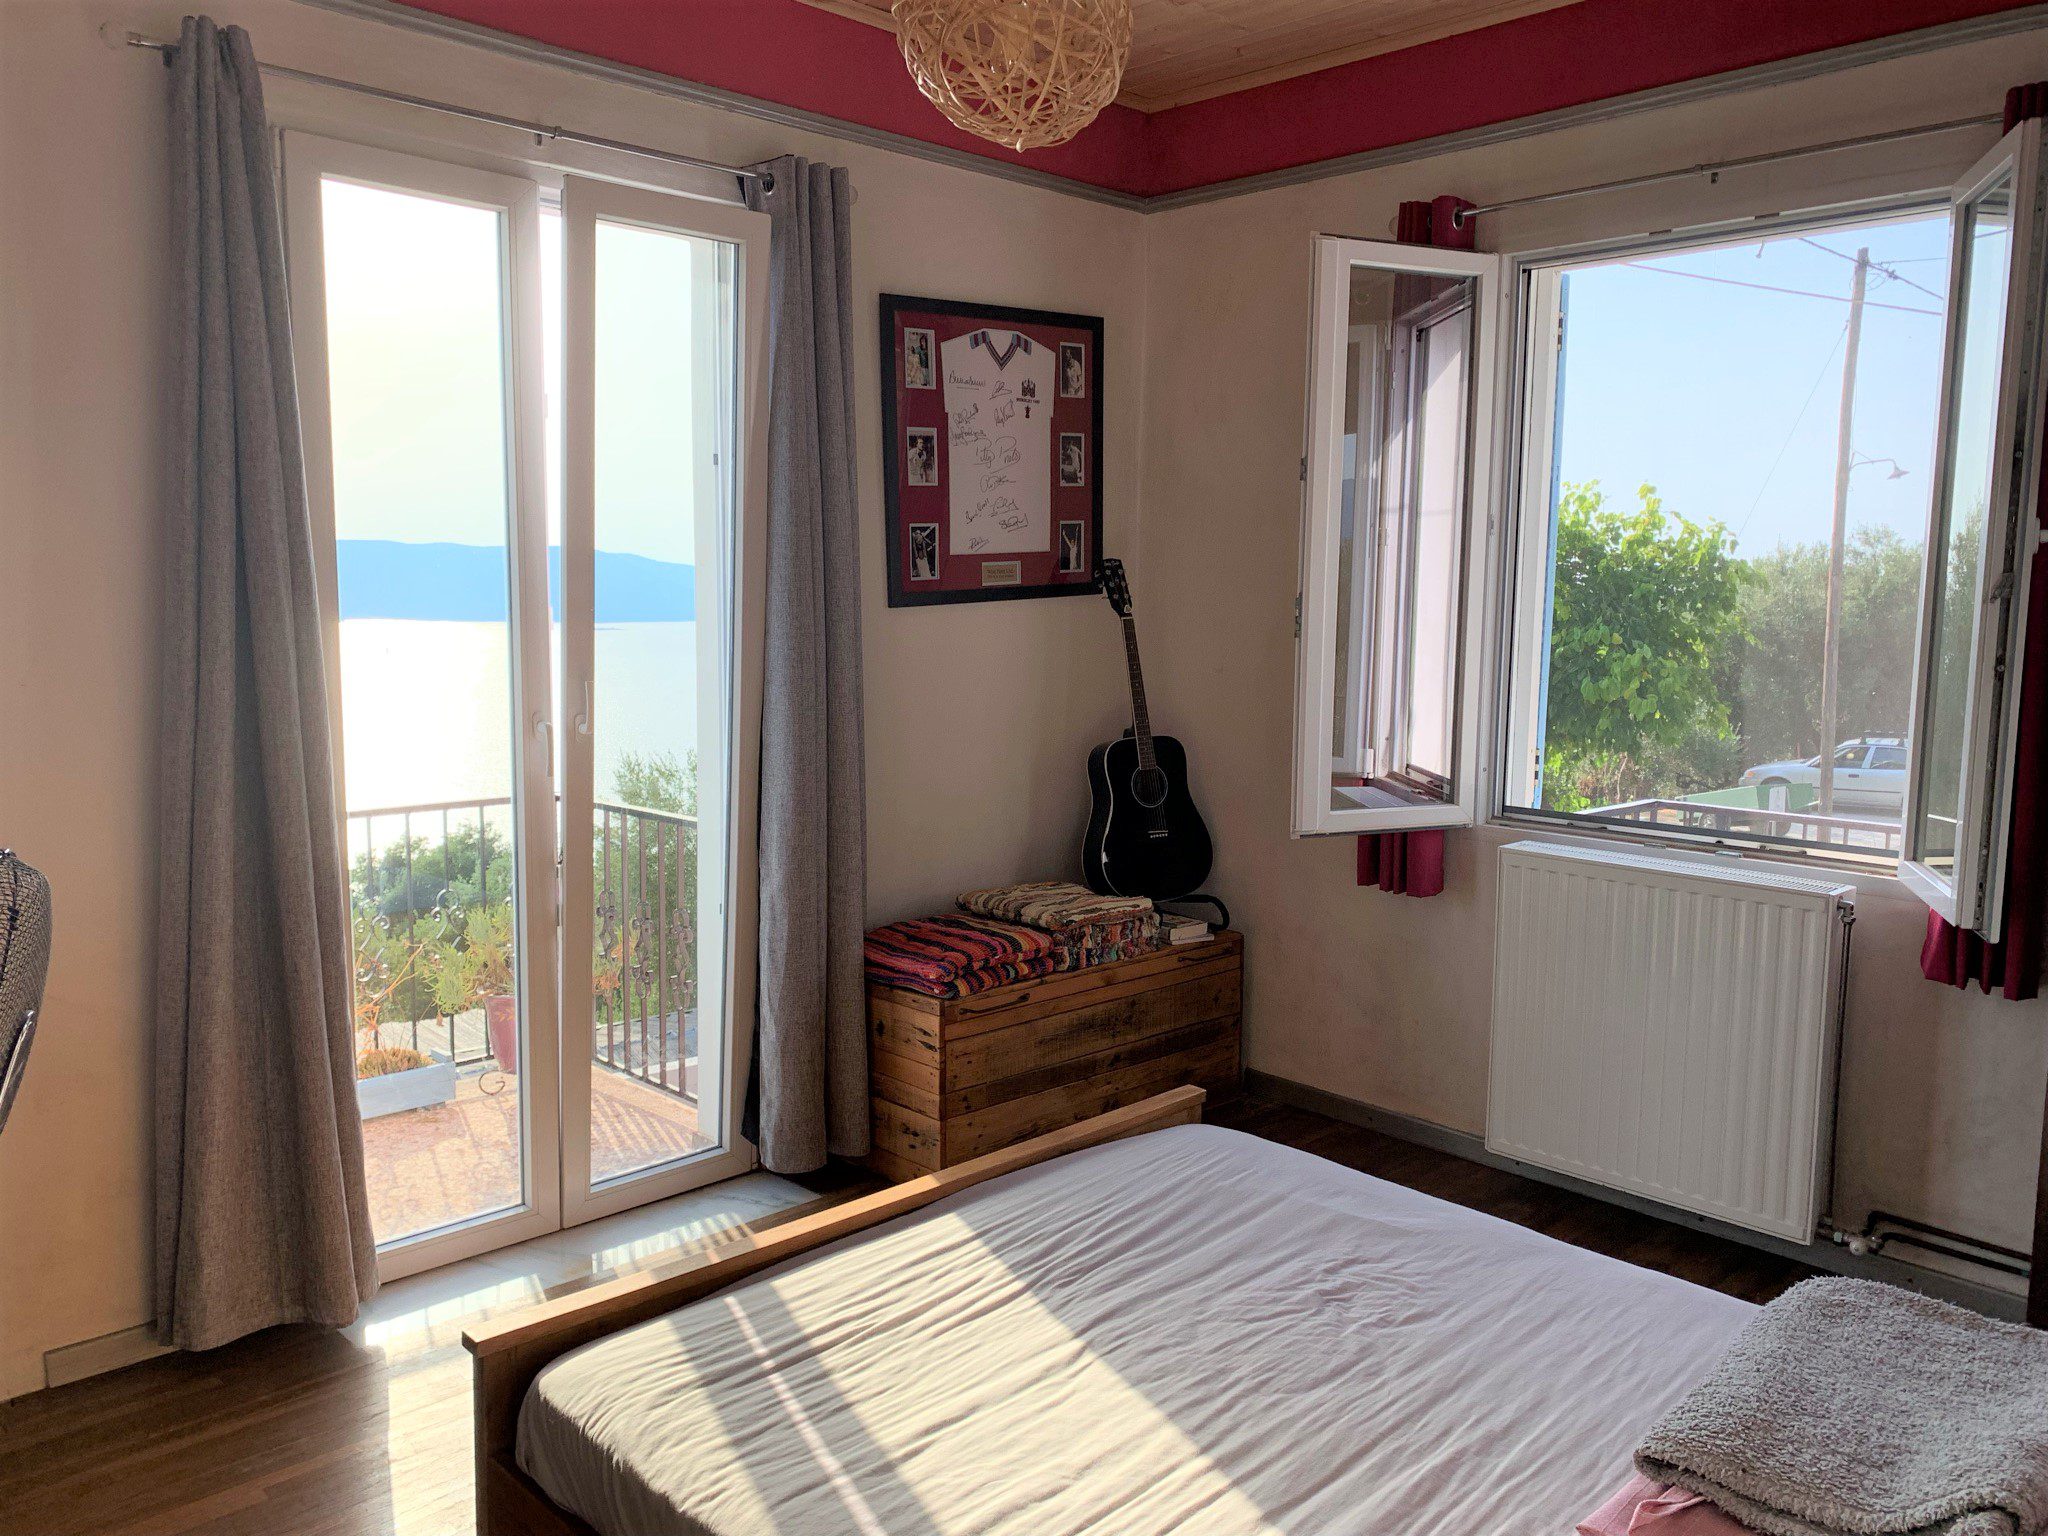 Bedroom of house for sale in Ithaca Greece, Lefki